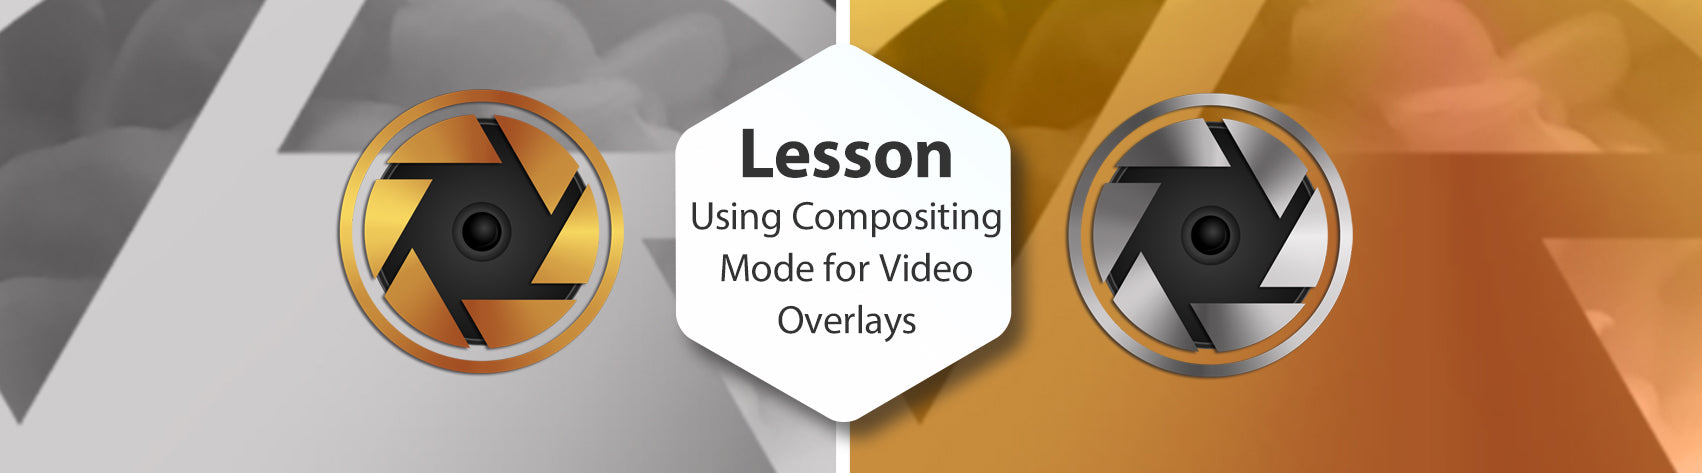 Lesson - Using Compositing Modes For Video Overlays